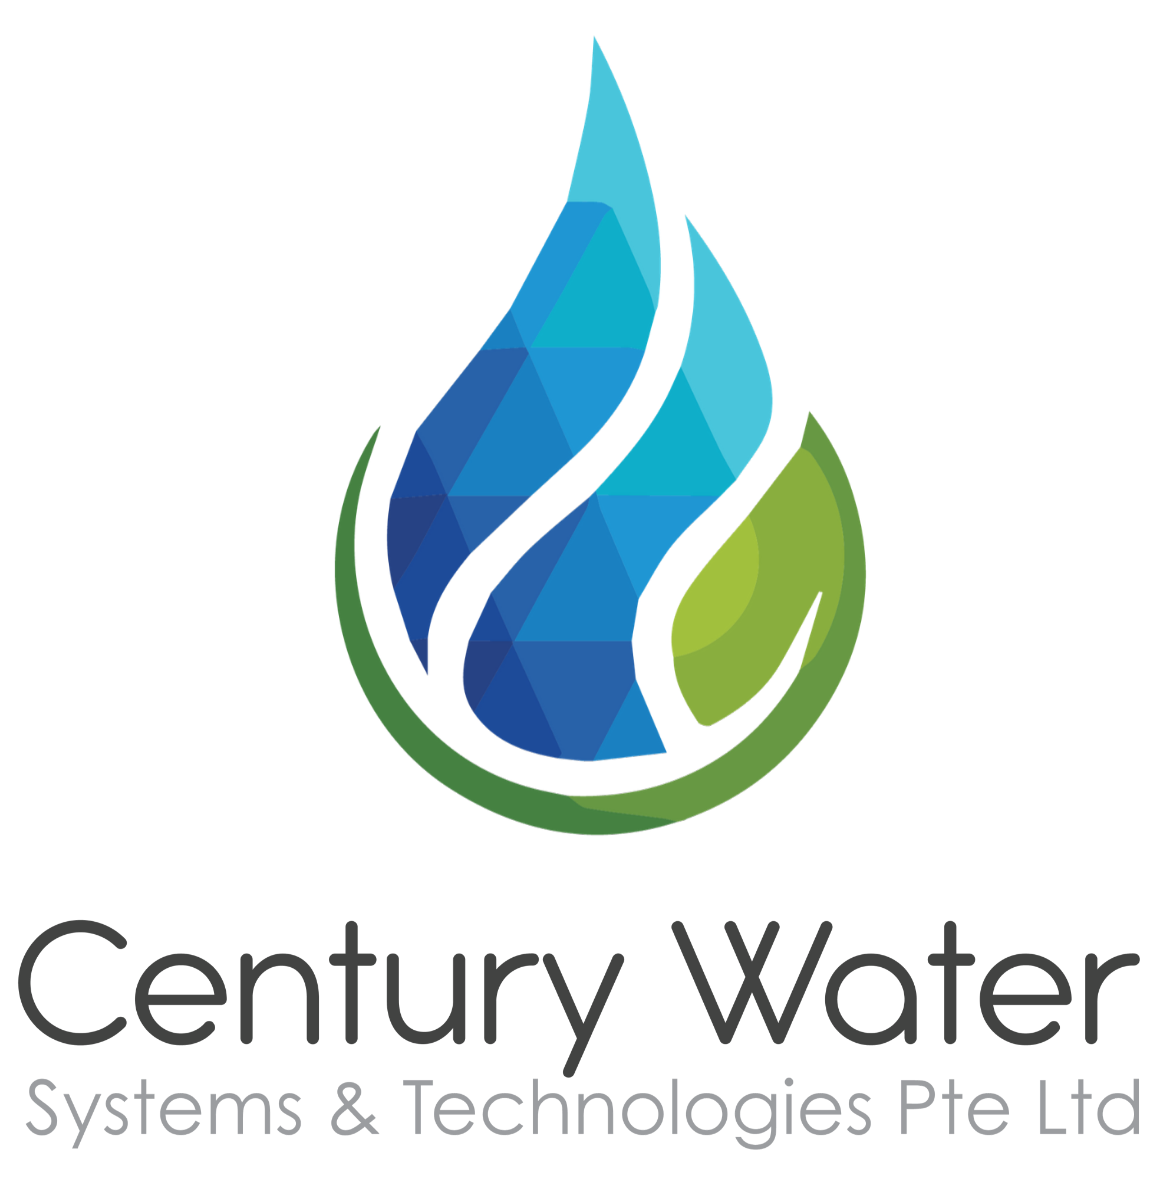 Century Water Systems  Technologies Pte Ltd Logo.png